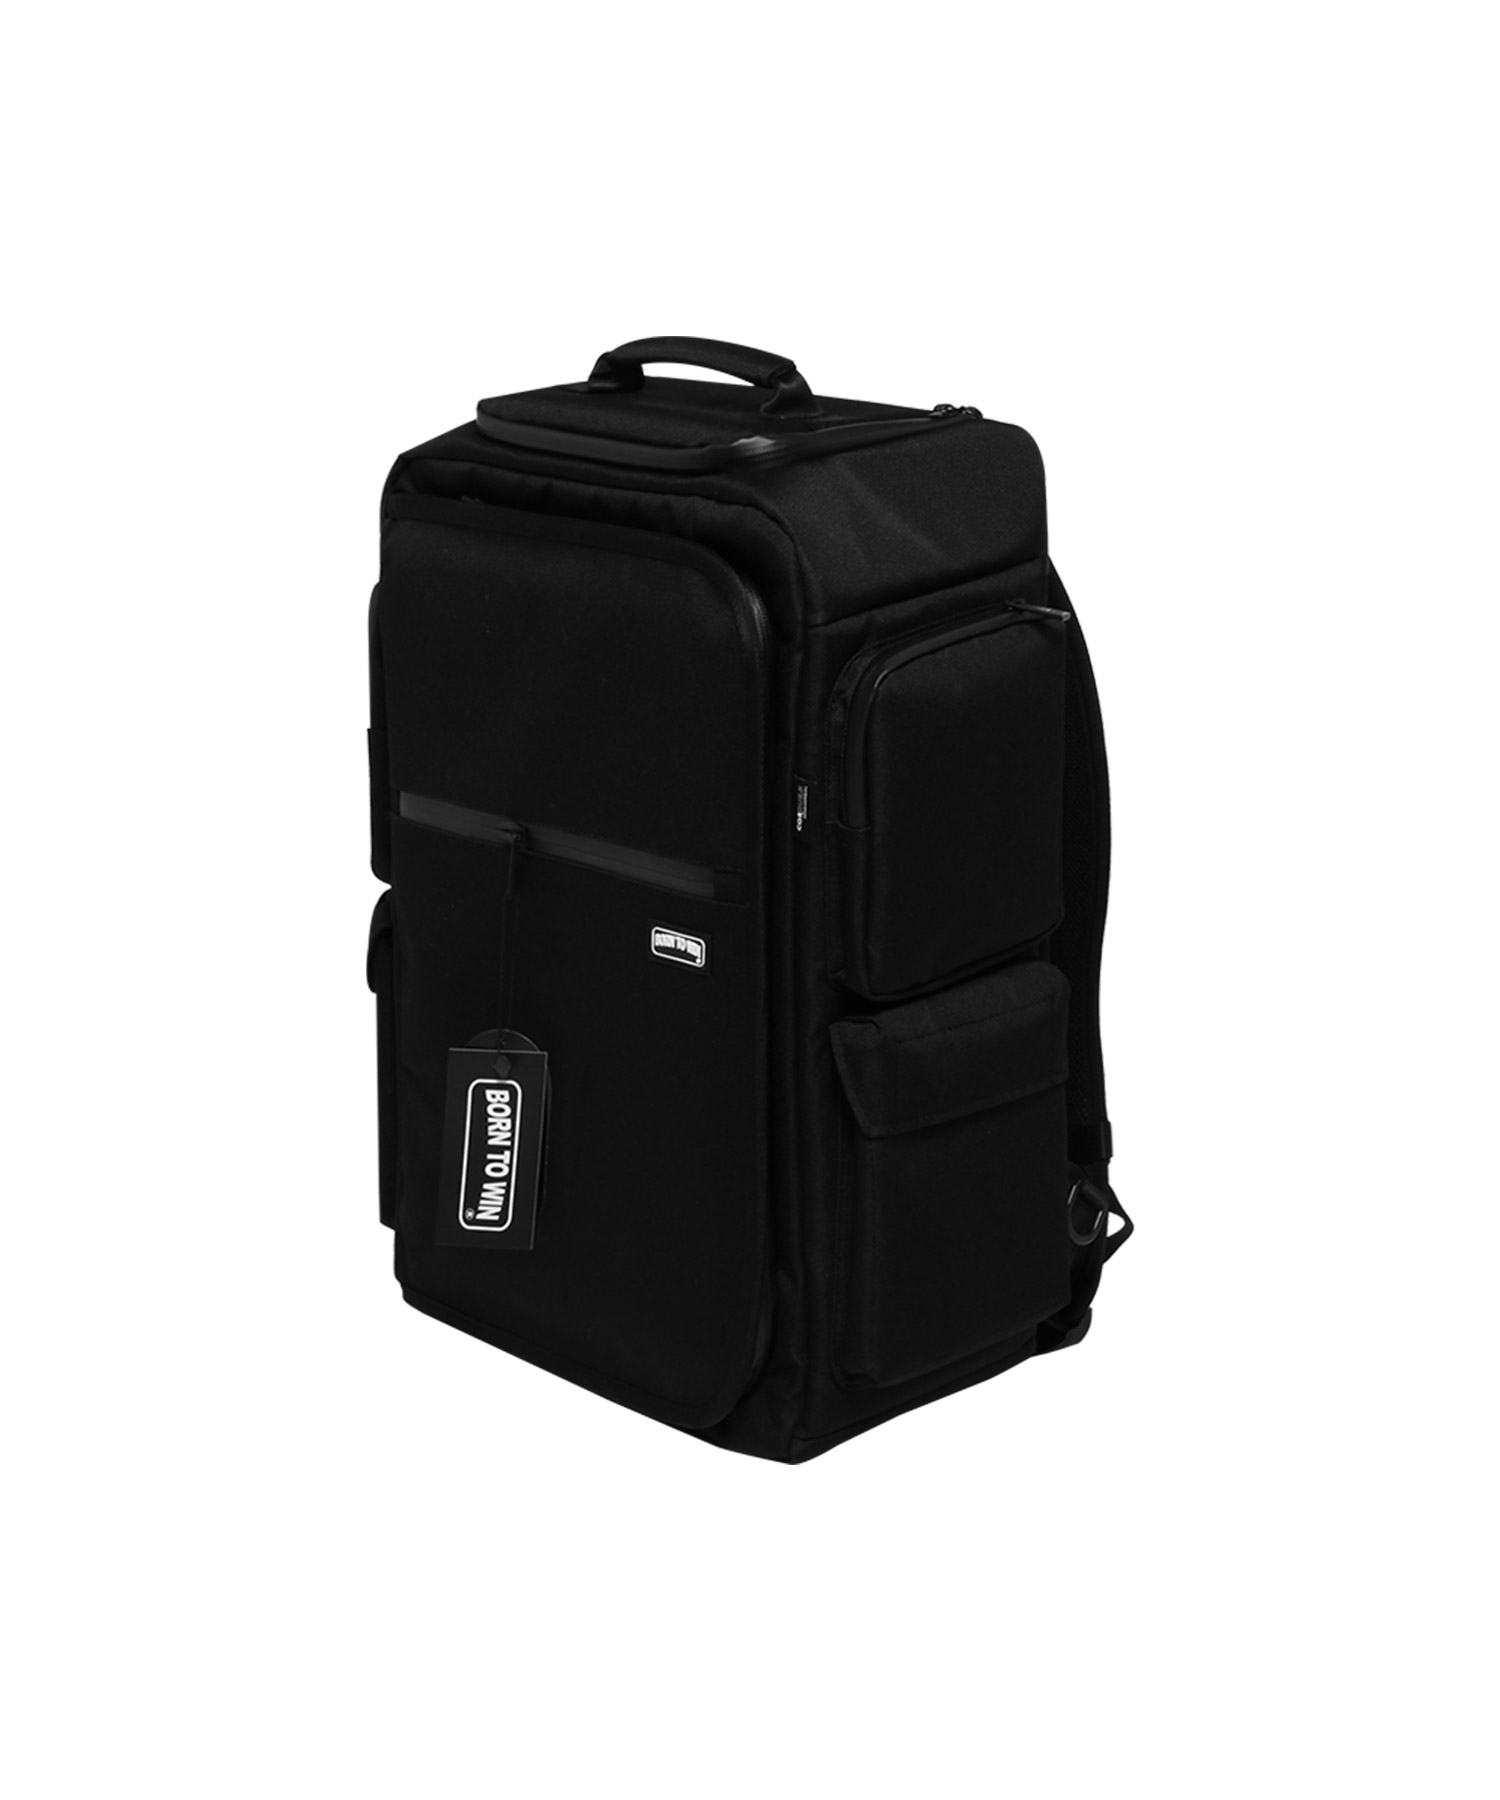 B2 BACKPACK NO PATCH VER [BLACK]